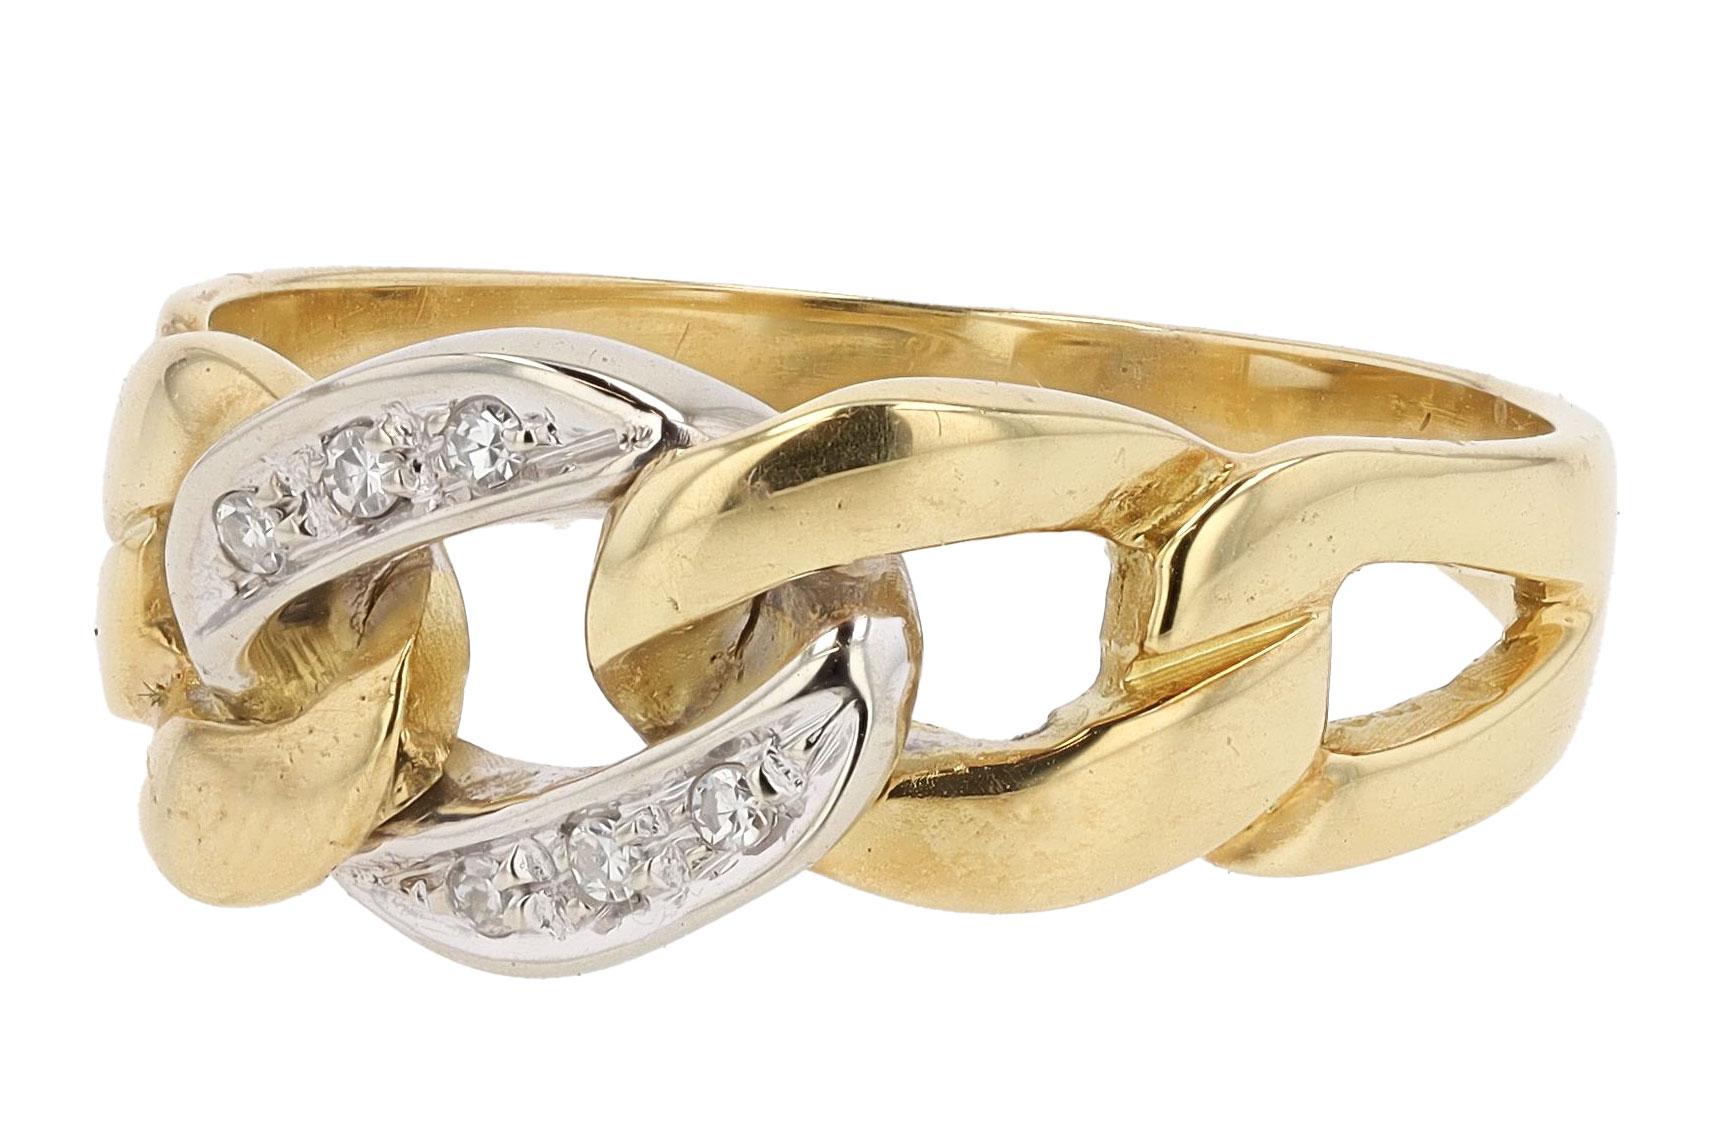 Expertly crafted with 18k white and yellow gold, this vintage stunner will be your favorite every day ring. Having a substantial 9mm width and sustainably crafted in a lovely cuban link design, featuring 6 near colorless natural diamonds. Own an